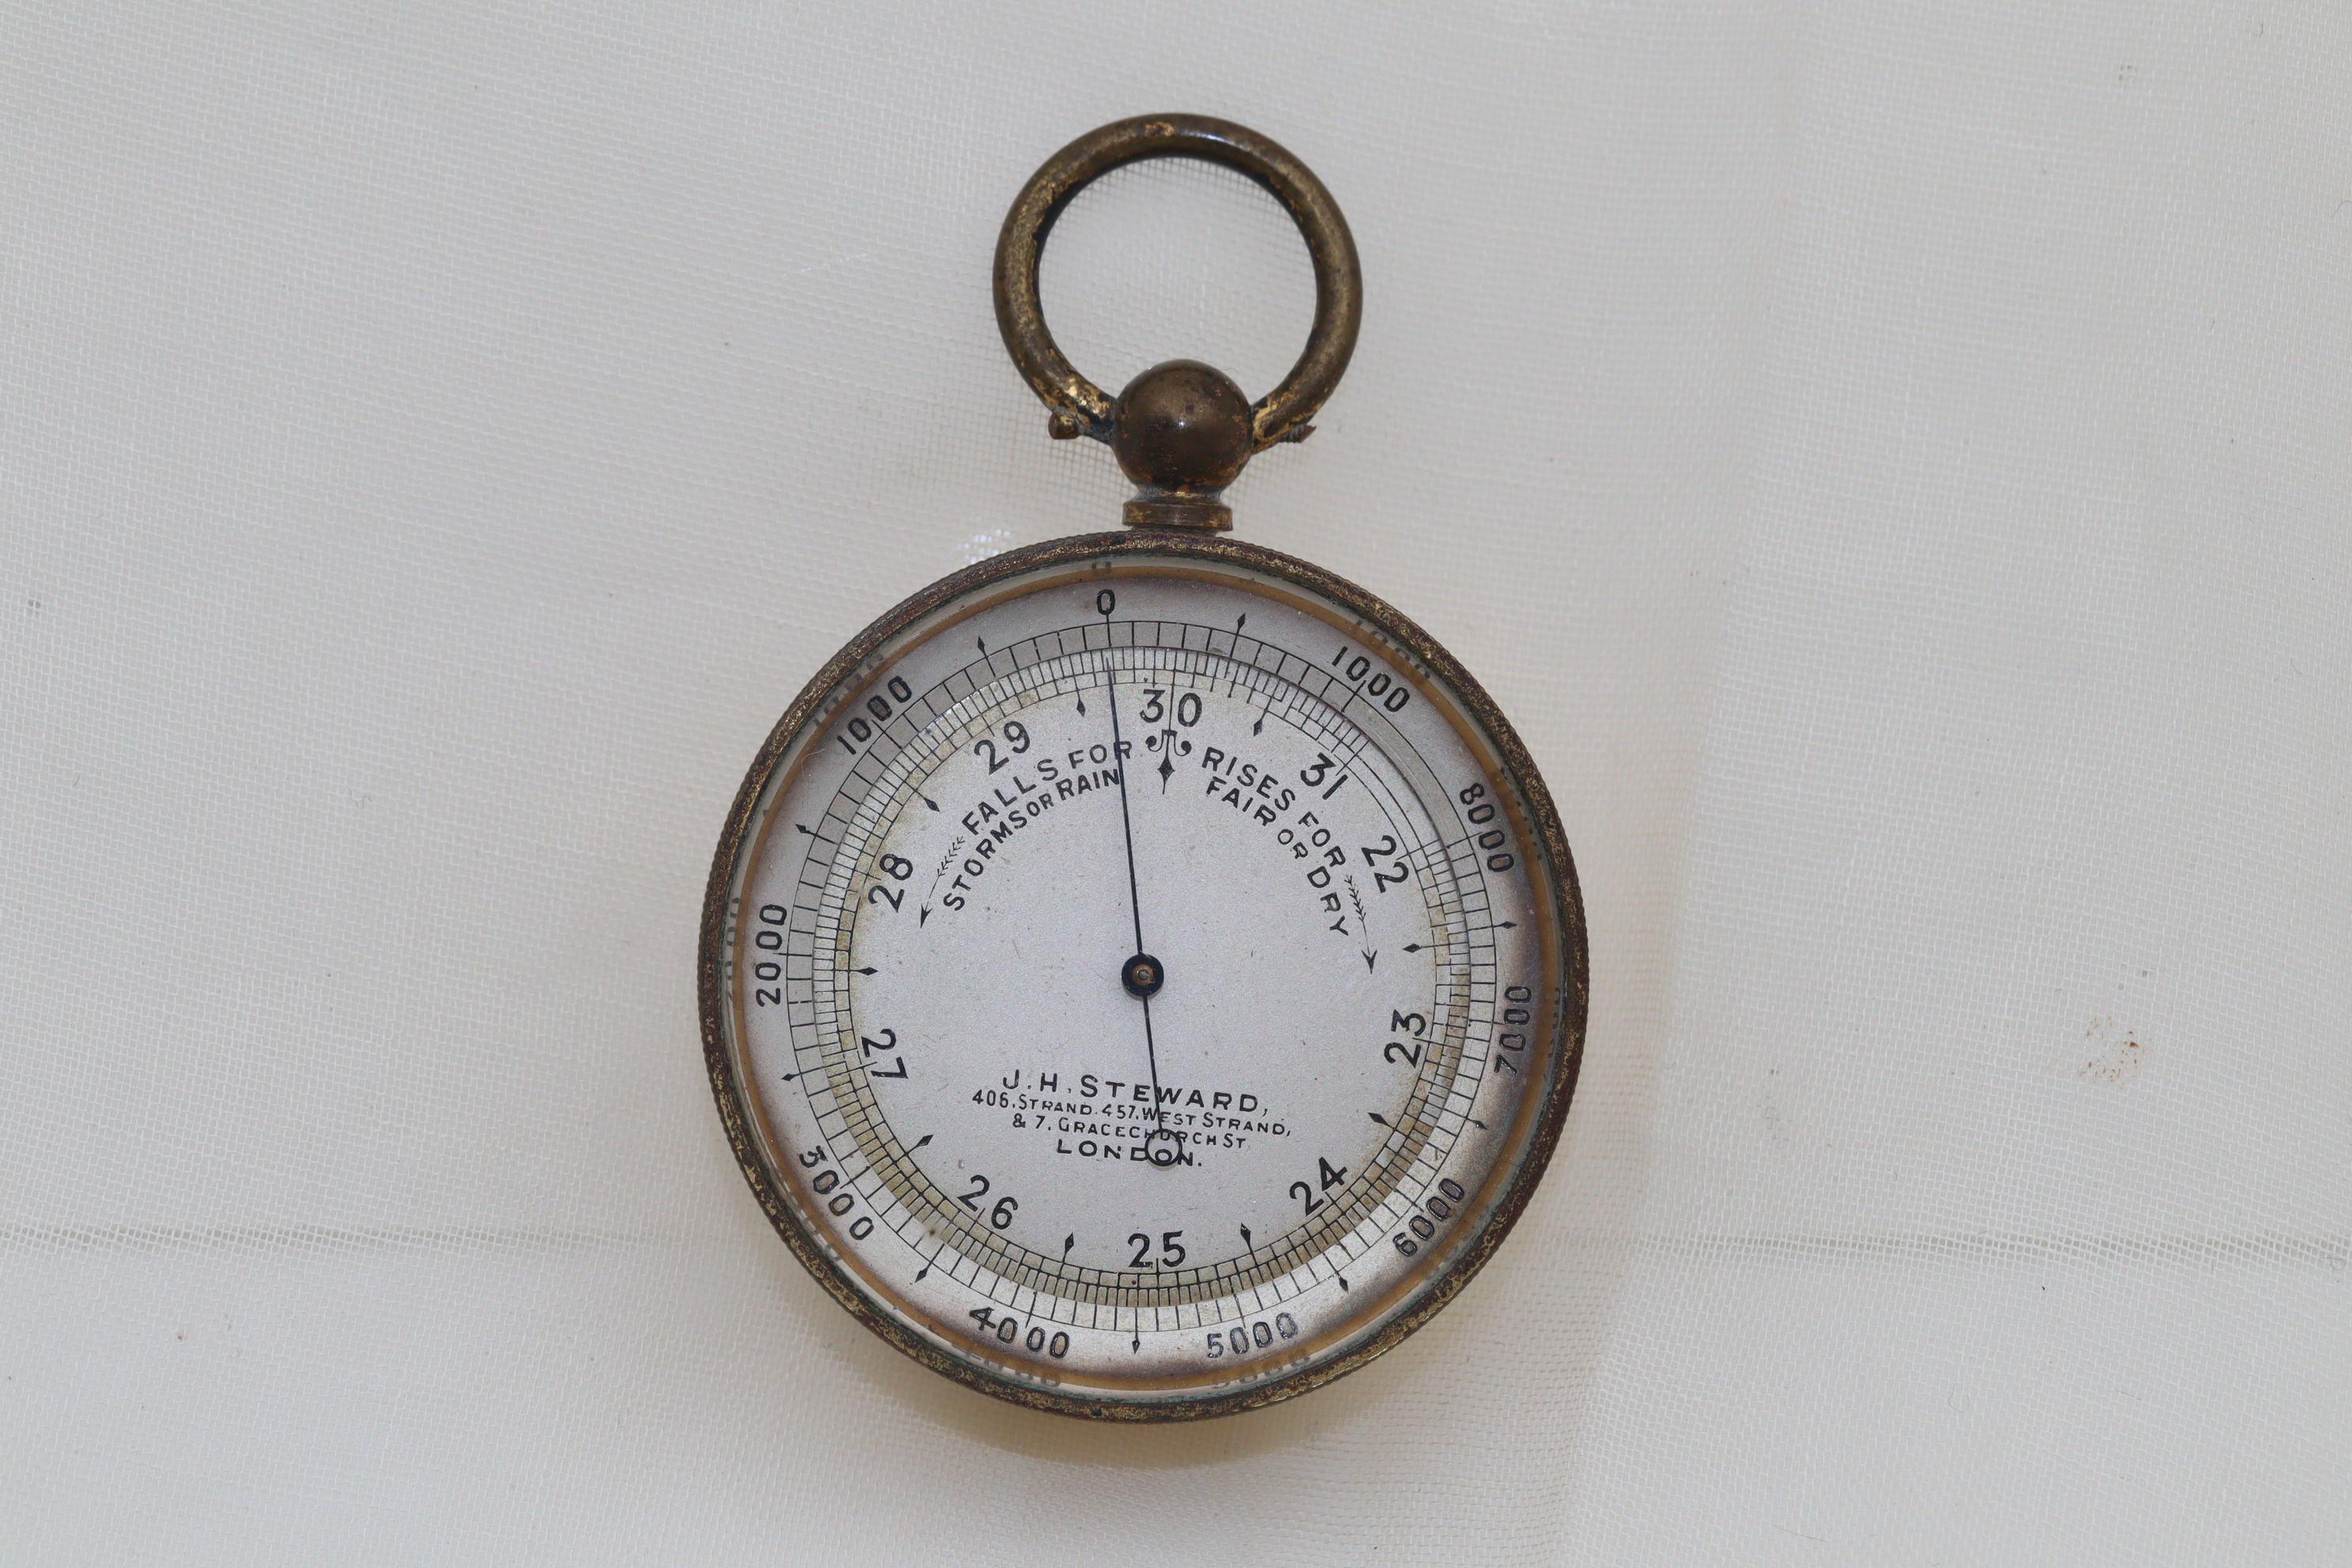 This pocket barometer was made by the firm of by J H Steward and is still in its original leather covered case. The silvered dial with its blued pointer is surrounded by a rotating altimeter bezel where the altitude reading goes to 8000 feet. The